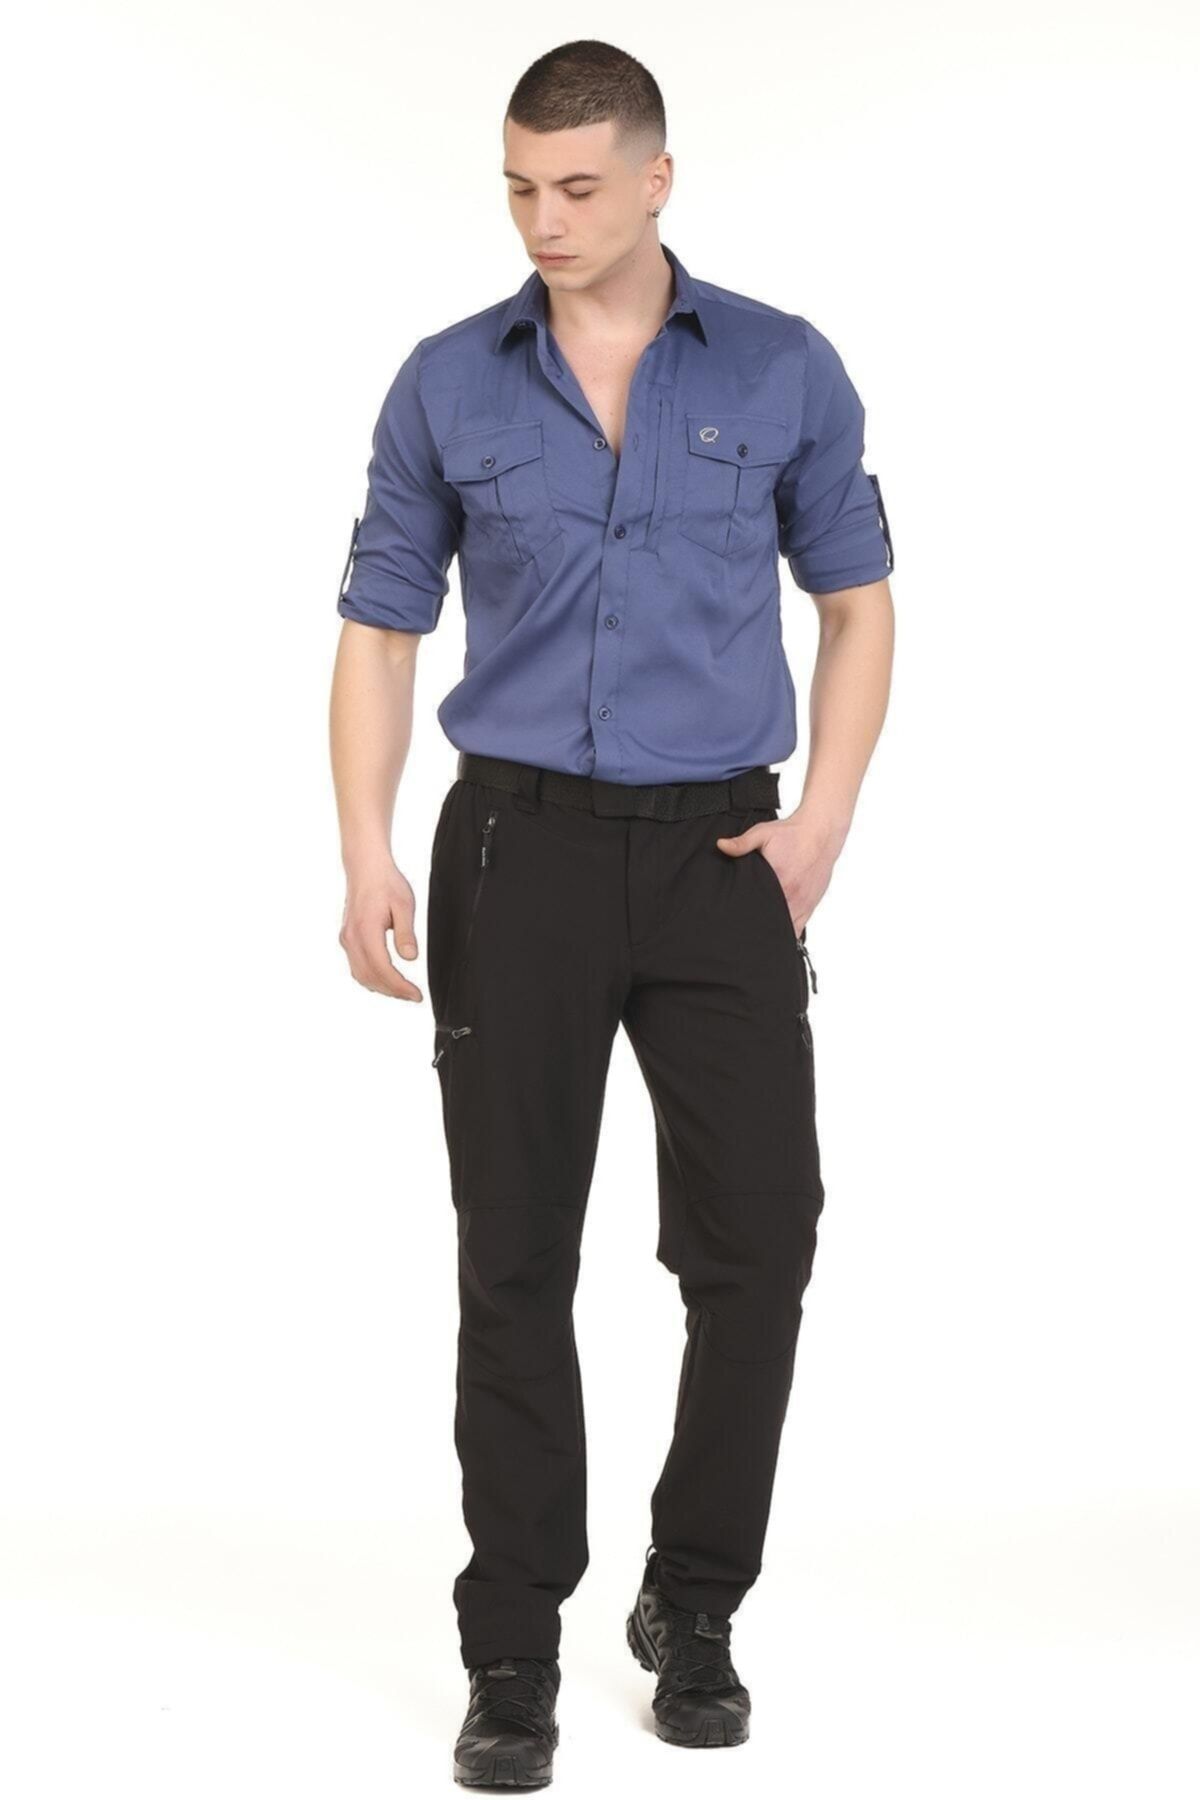 Q Steinbock Hector Man Trousers